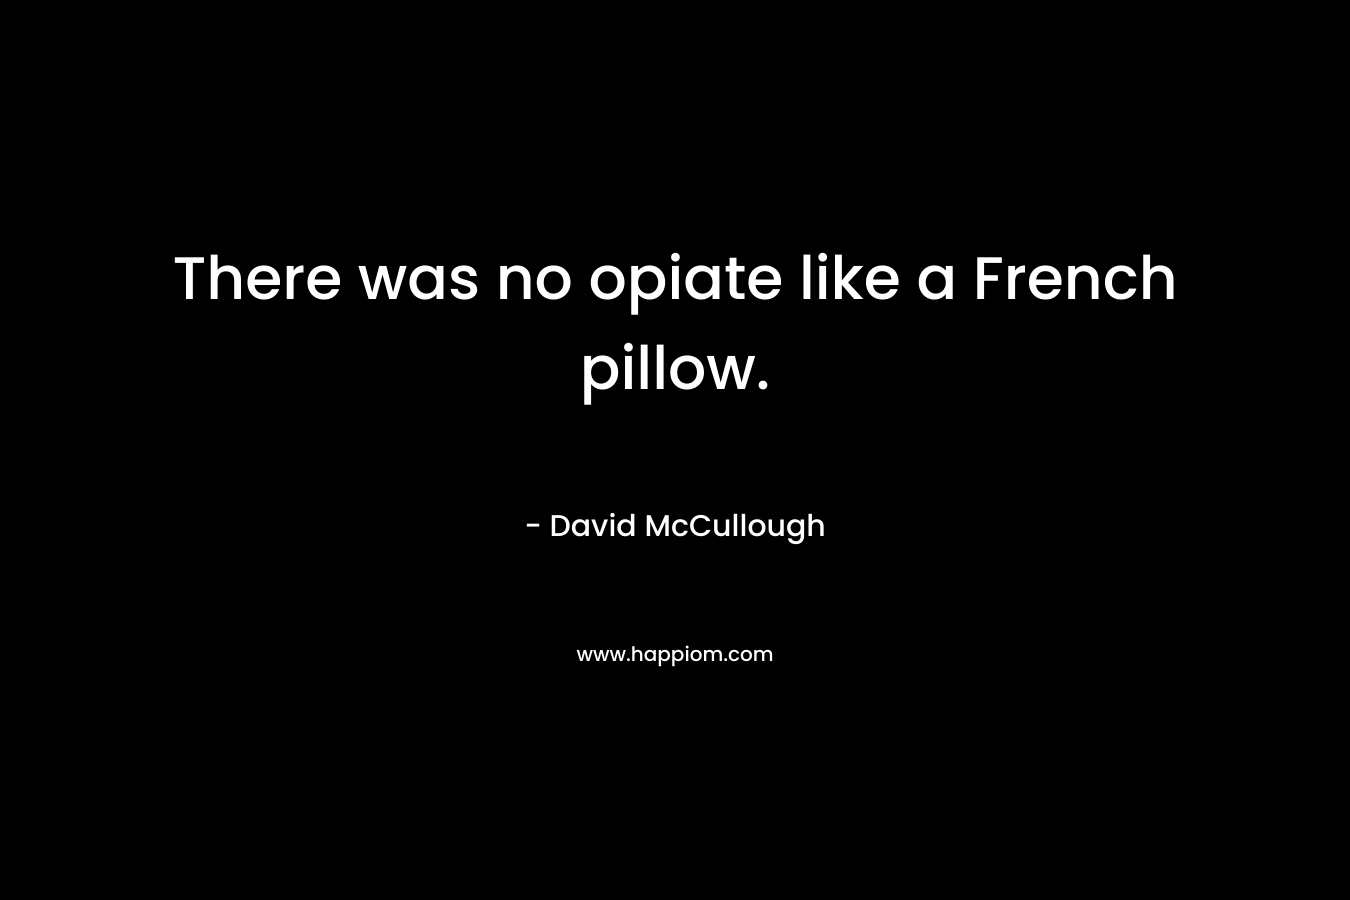 There was no opiate like a French pillow. – David McCullough